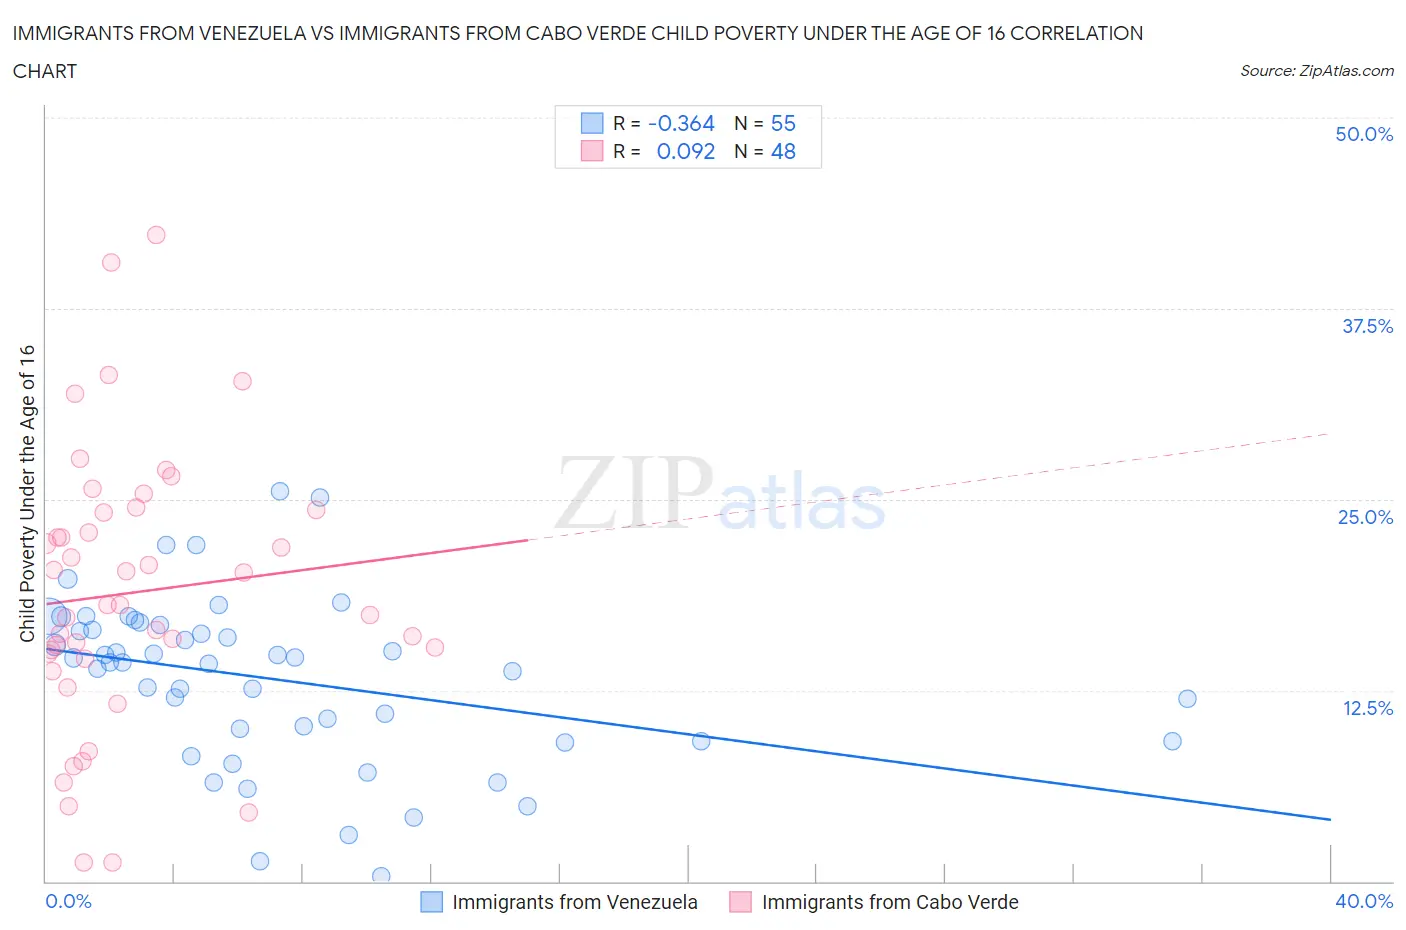 Immigrants from Venezuela vs Immigrants from Cabo Verde Child Poverty Under the Age of 16